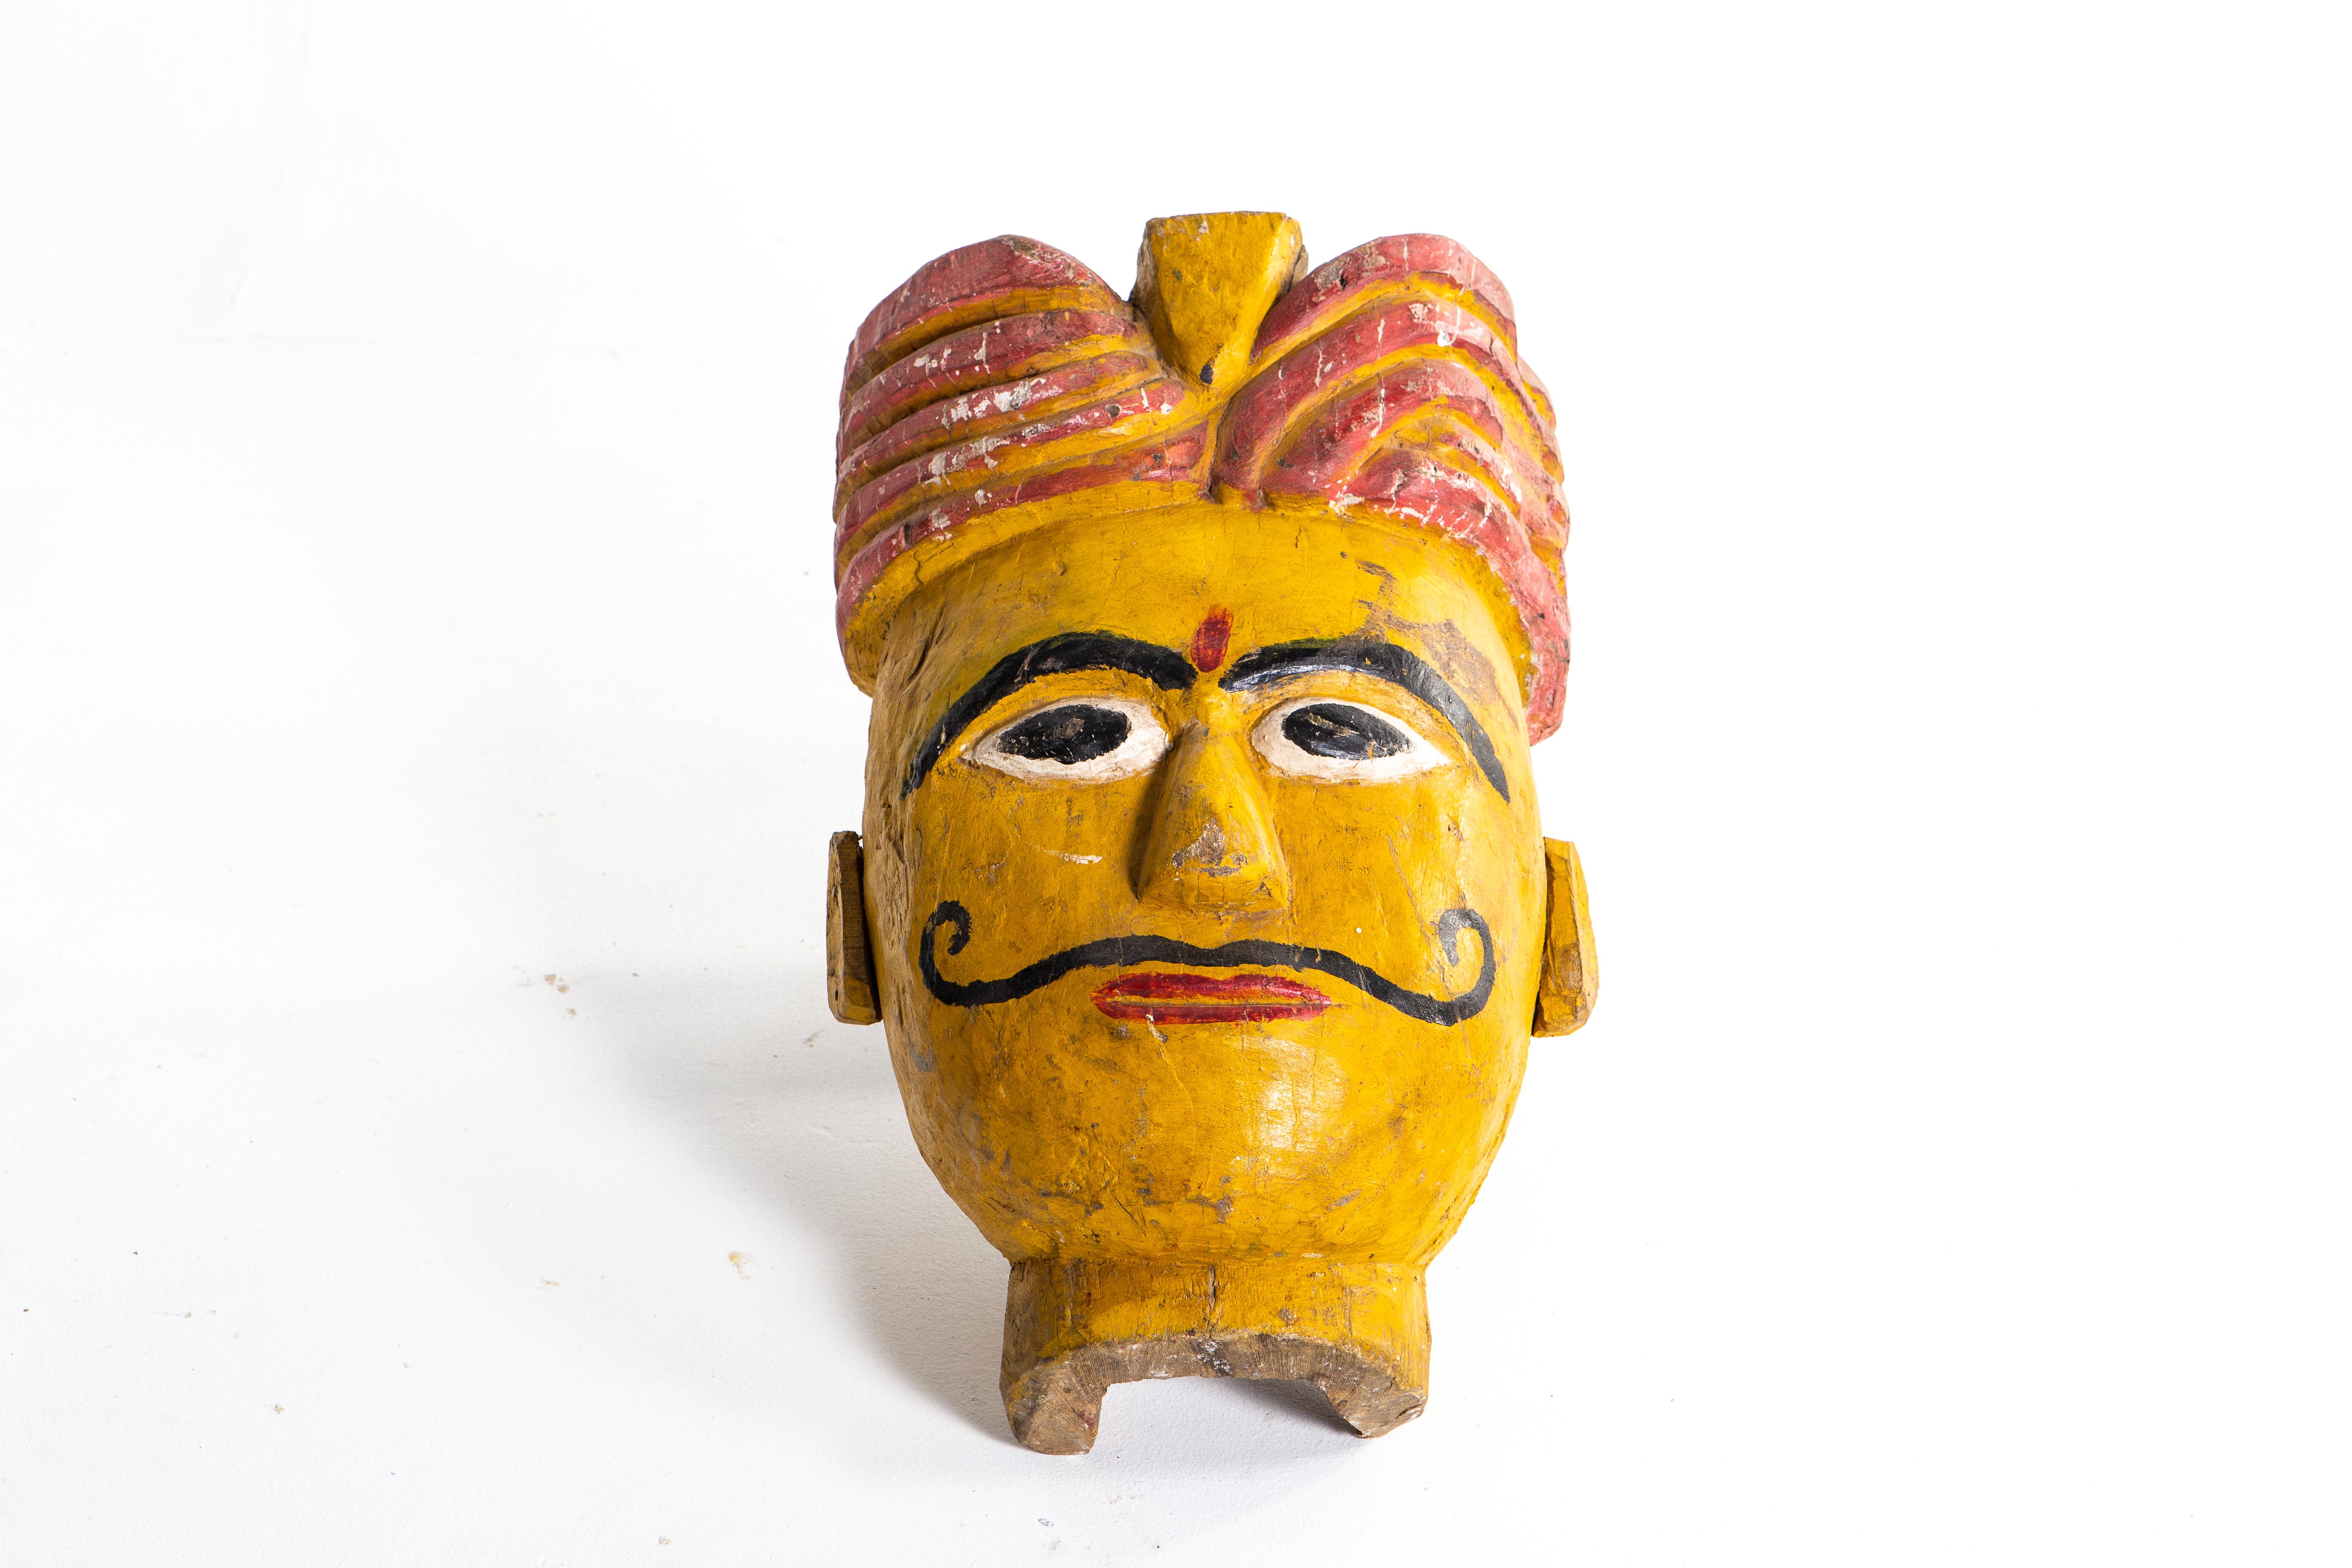 Poly-chrome wooden mask from Rajasthan, India, made from sheesham wood, circa 20th century. The mask features a grotesque smile that is designed to ward off the evil eye. According to traditional beliefs, a beautiful mask would only lure envy and